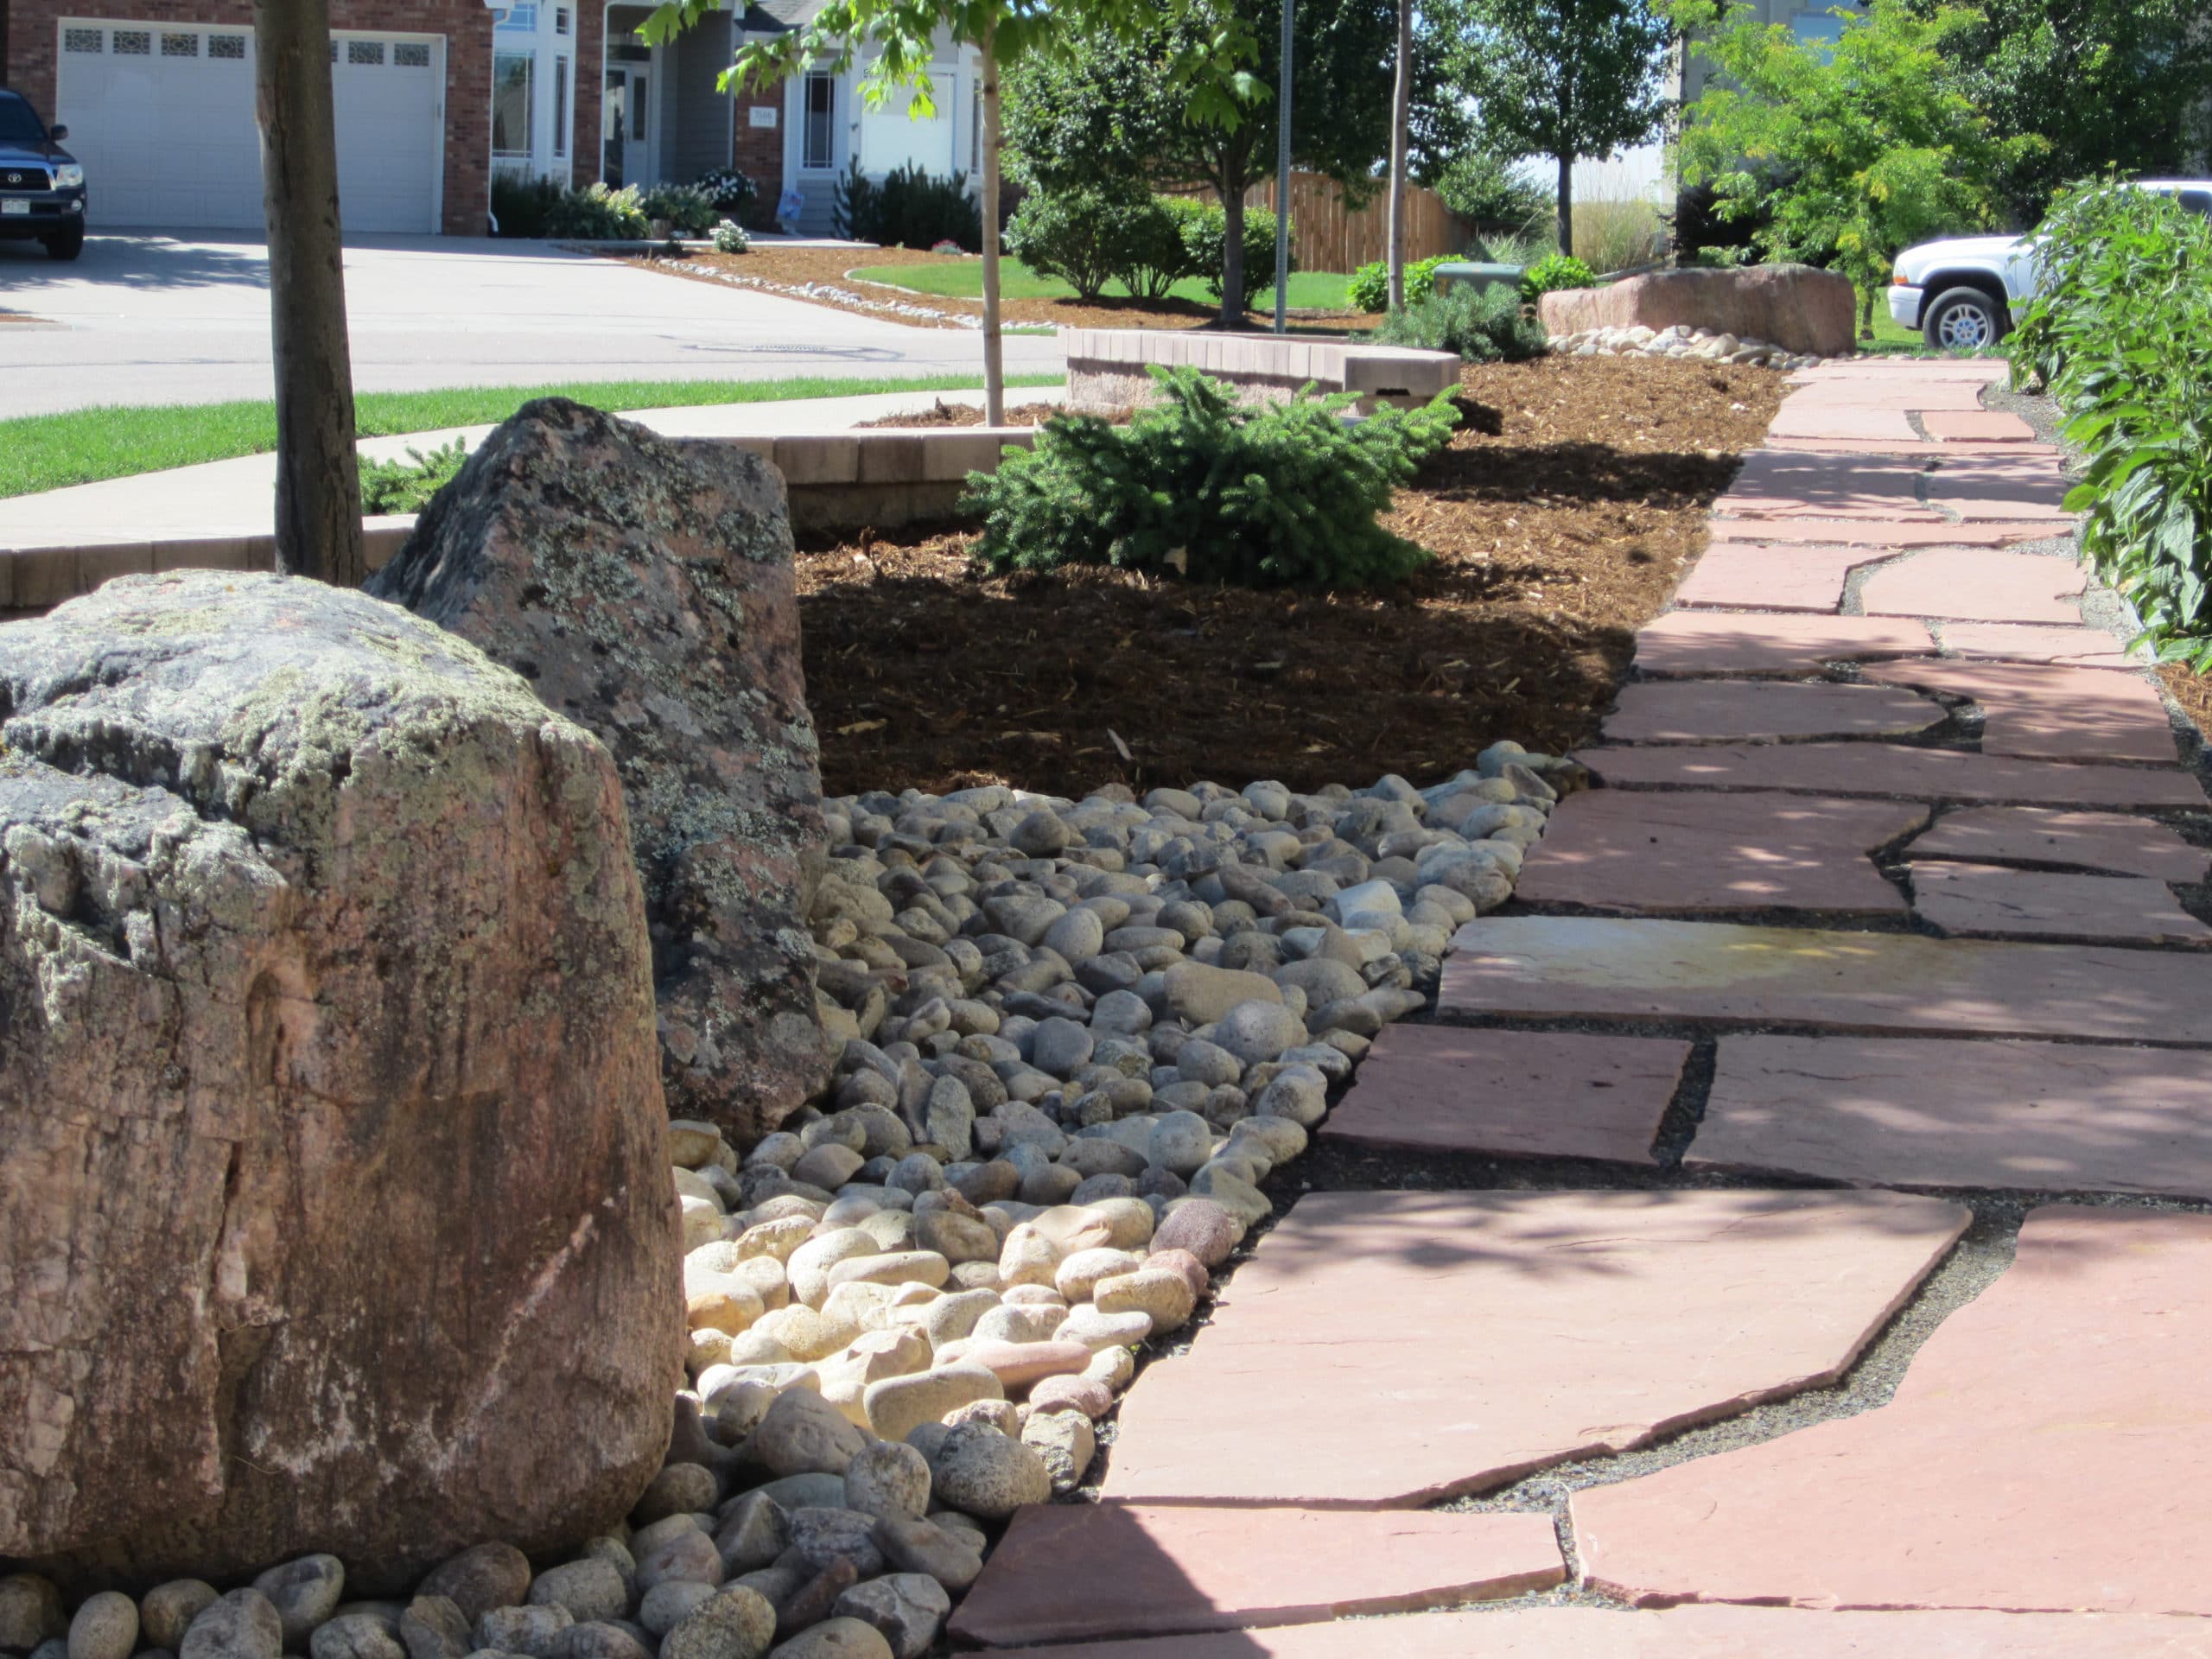 Flat stone path in front of house with rock and mulch landscaping.